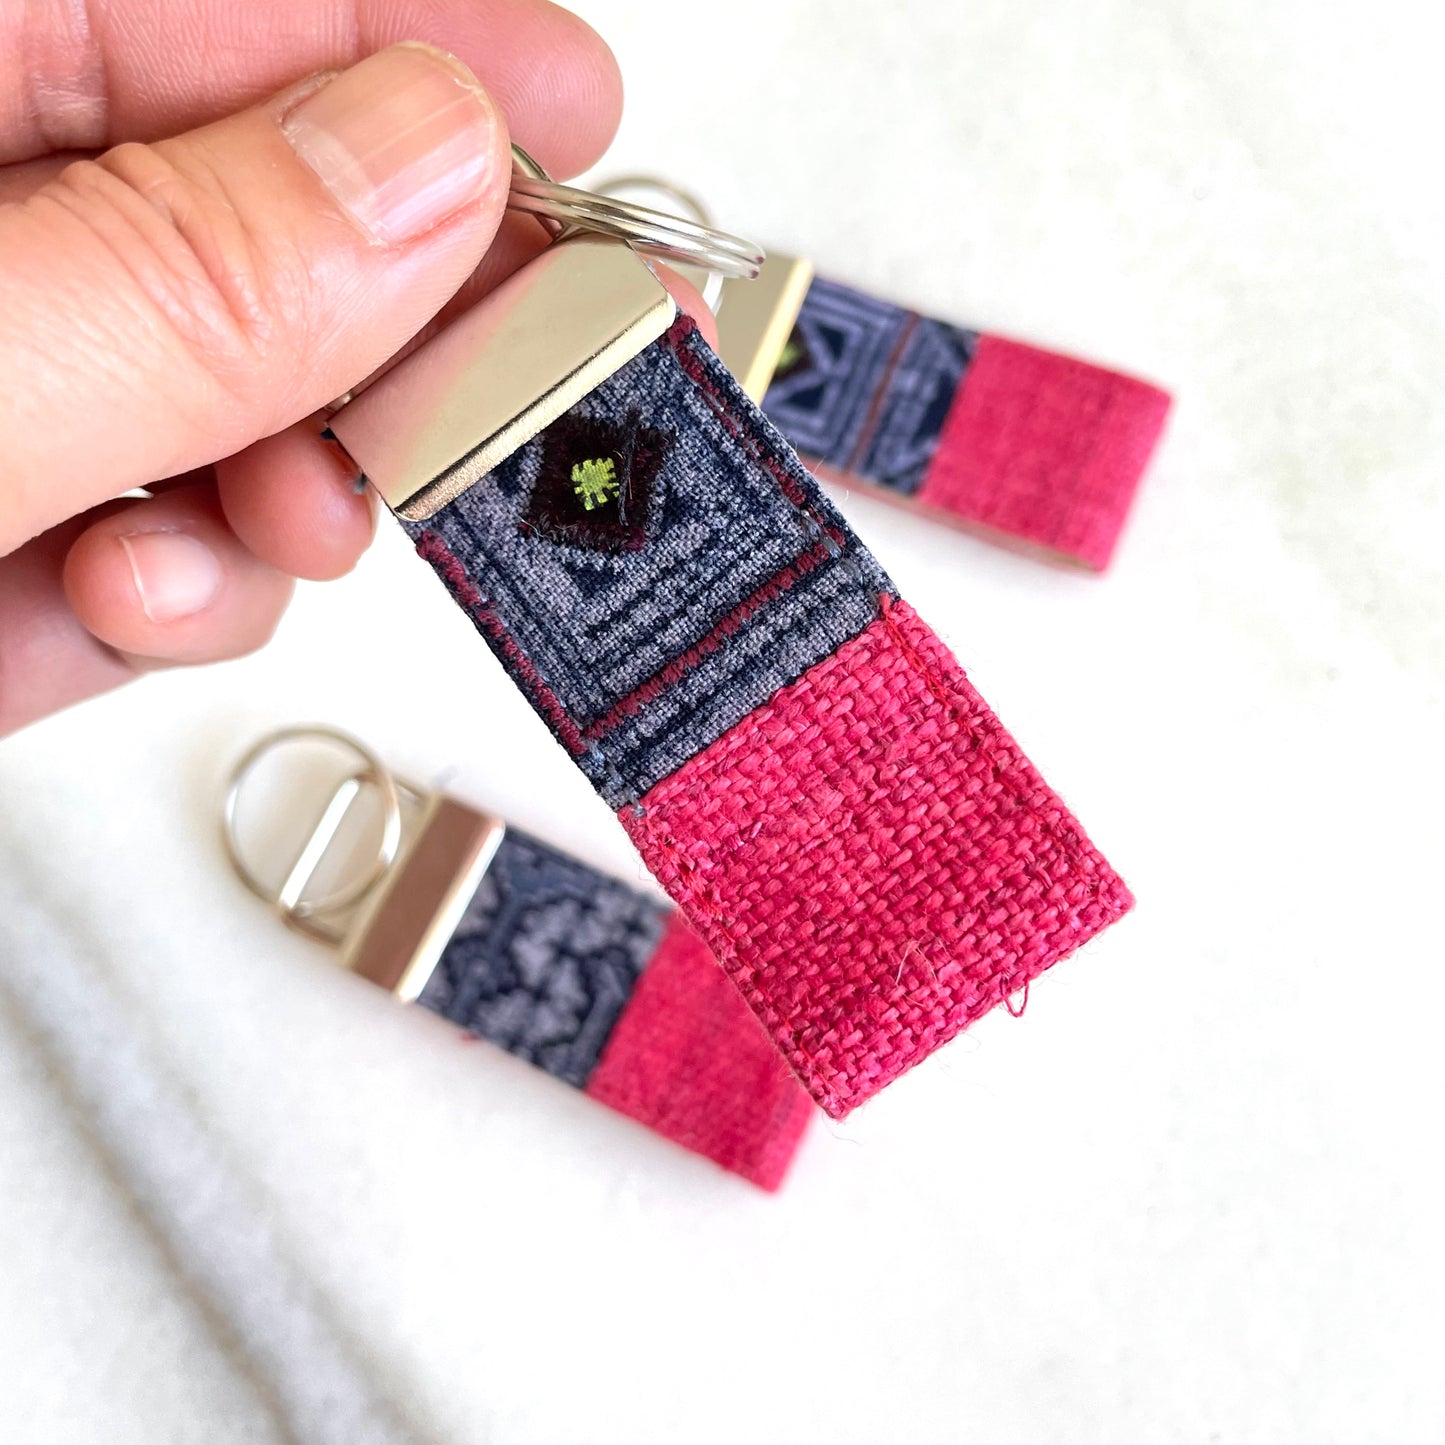 Pink hemp fabric keychain with vintage batik patch, stainless metal key fob